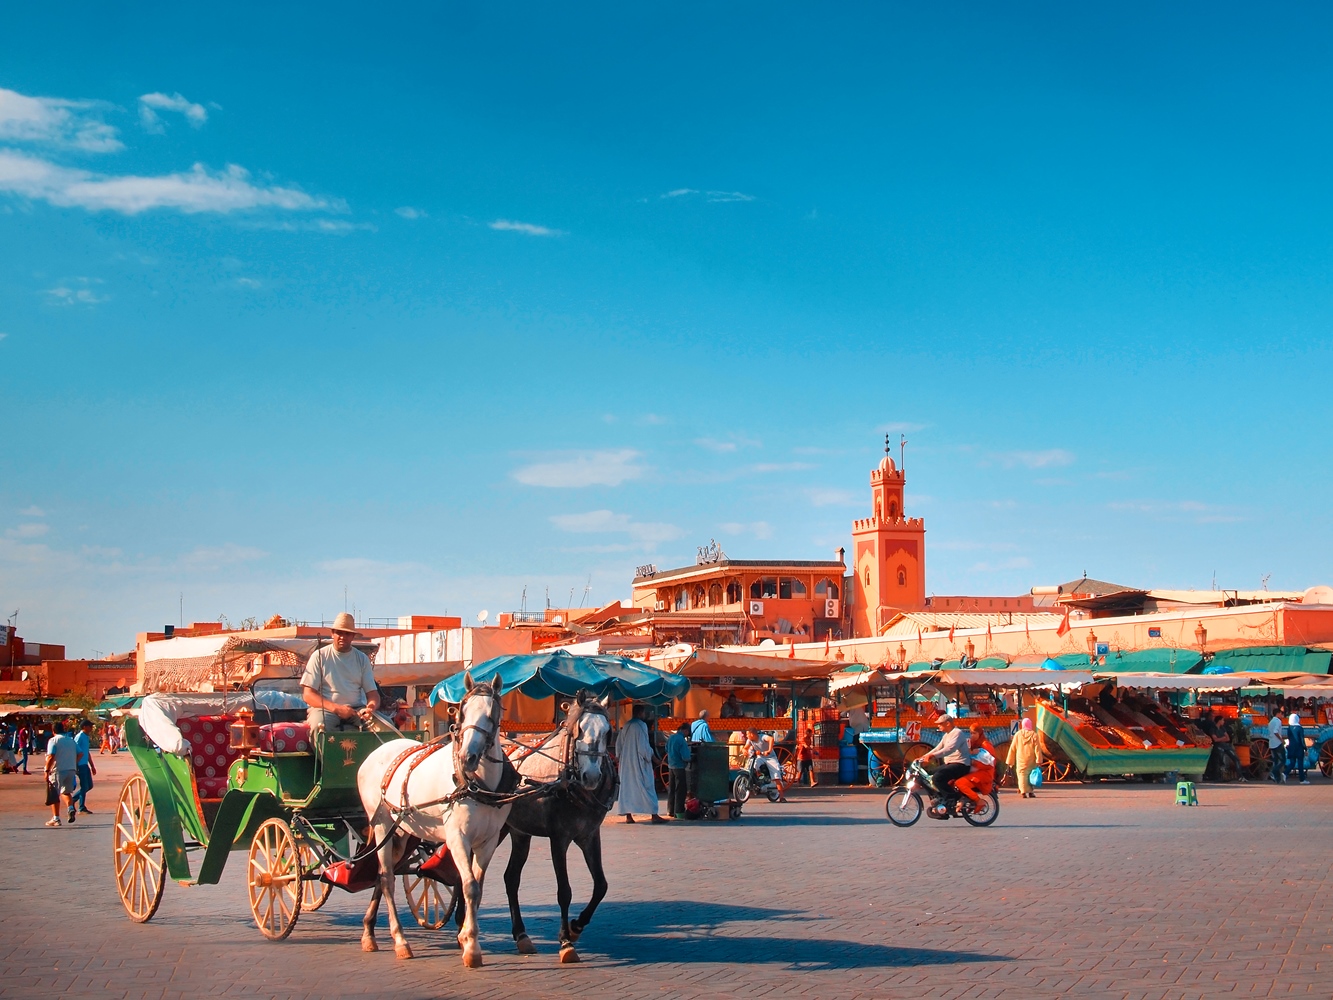 A horse and carriage drive through a sunny Djemaa el-Fna. Image by Alberto Manuel Urosa Toledano/Moment Editorial/Getty Images 